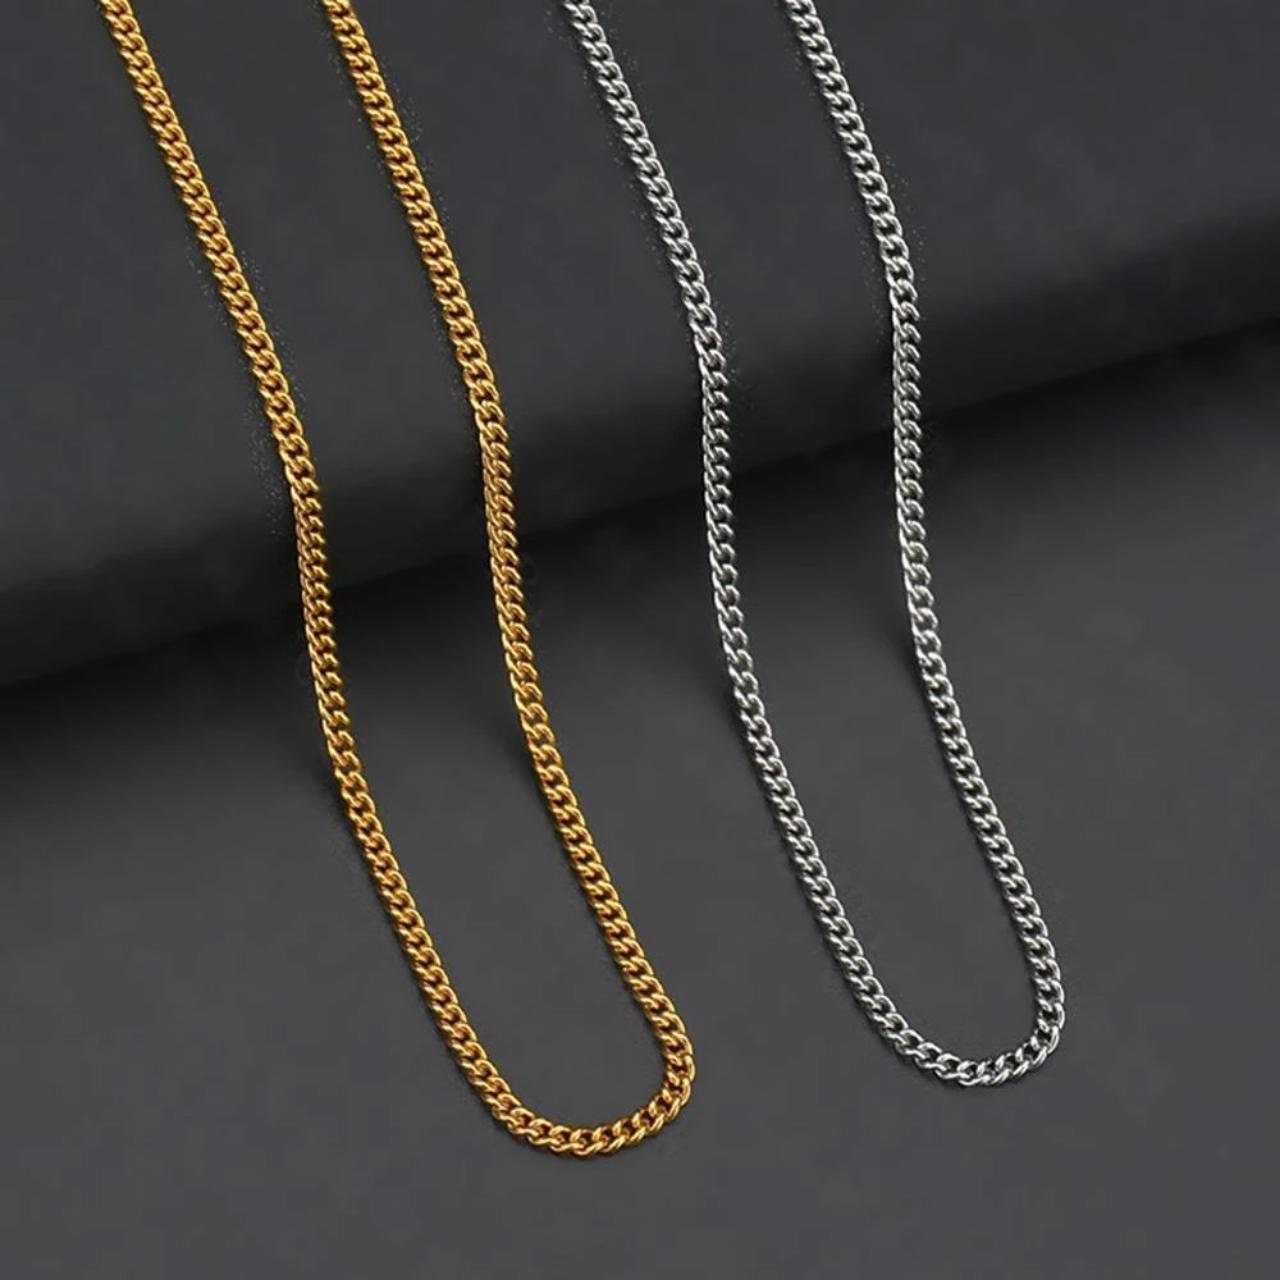 CRW Compass Necklace with 1.8mm curb link chain in gold - North Star Necklace for Women - Direction Necklace for Men - Necklace with Pendant